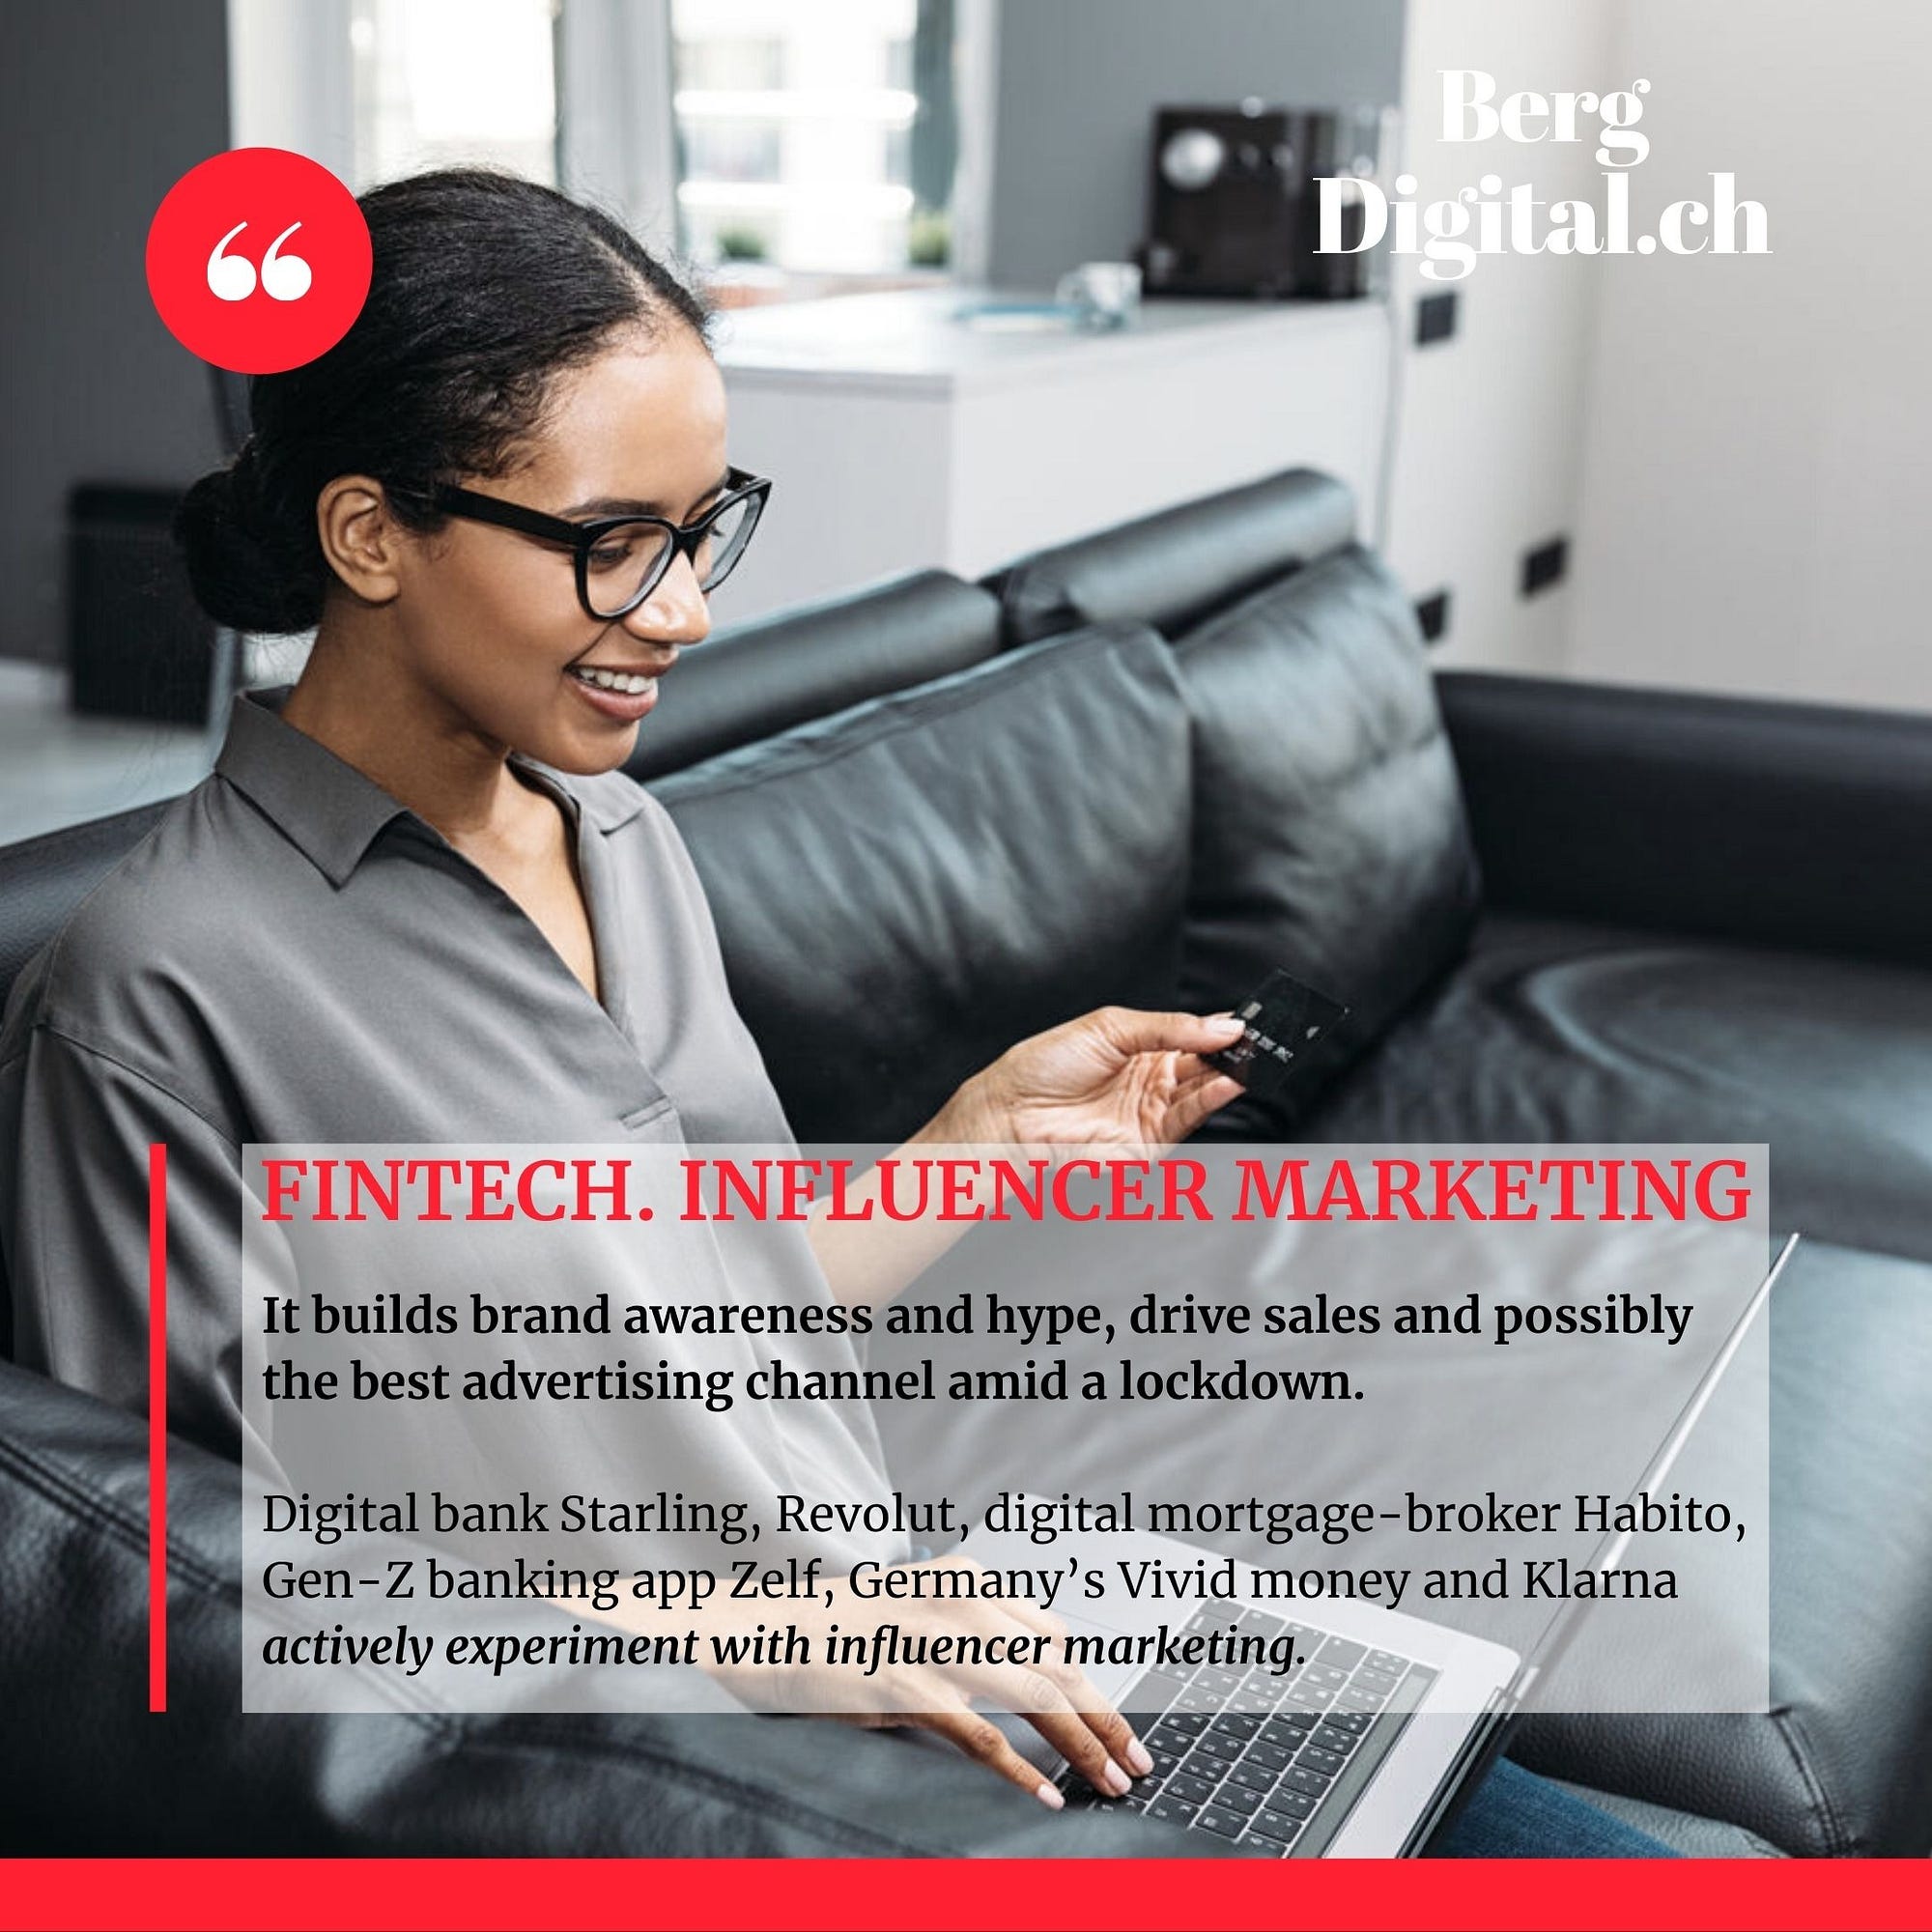 Influencer marketing in FinTech. Pro vs Contra